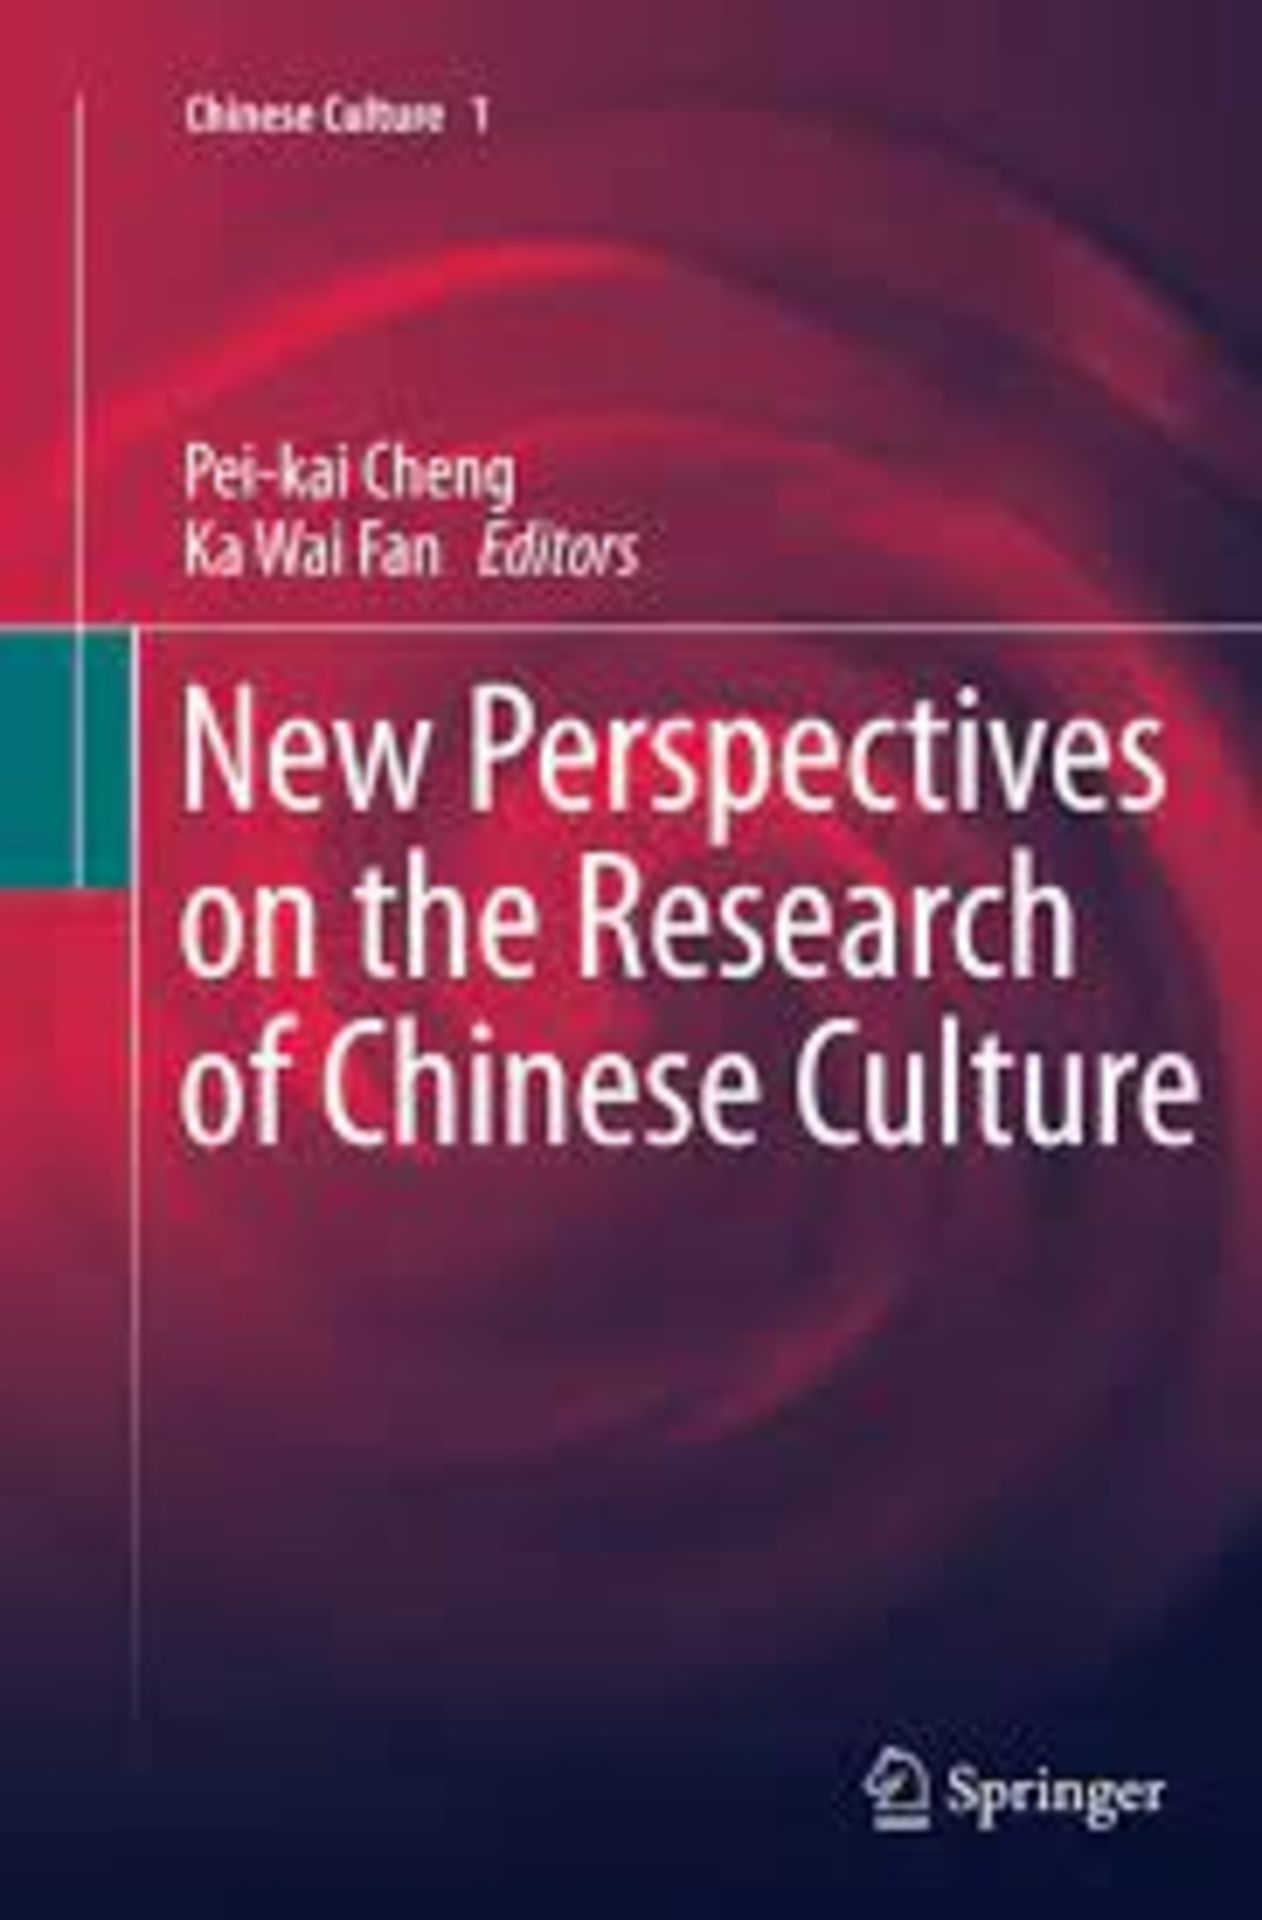 RRP £1348 (Approx. Count 25)(B51) spW50I3963N 1x New Perspectives on the Research of Chinese